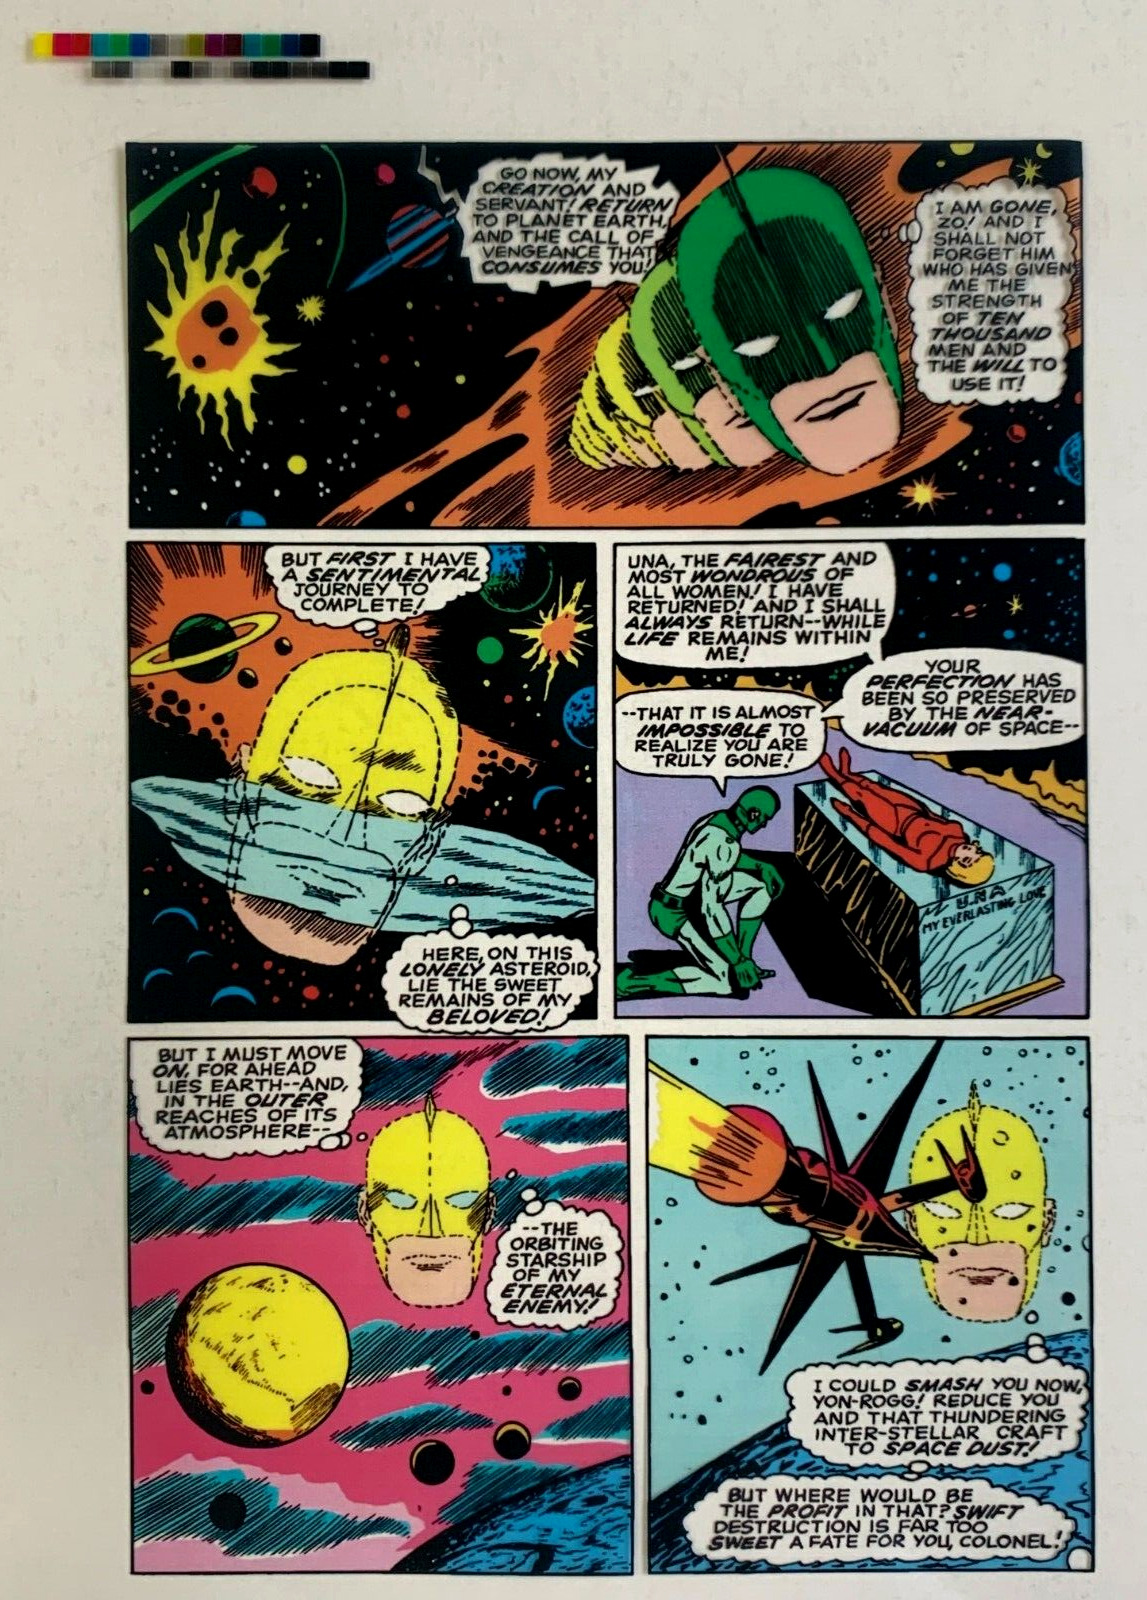 Color Production Art CAPTAIN MARVEL #12, page #3, DICK AYERS art, 8.5x11